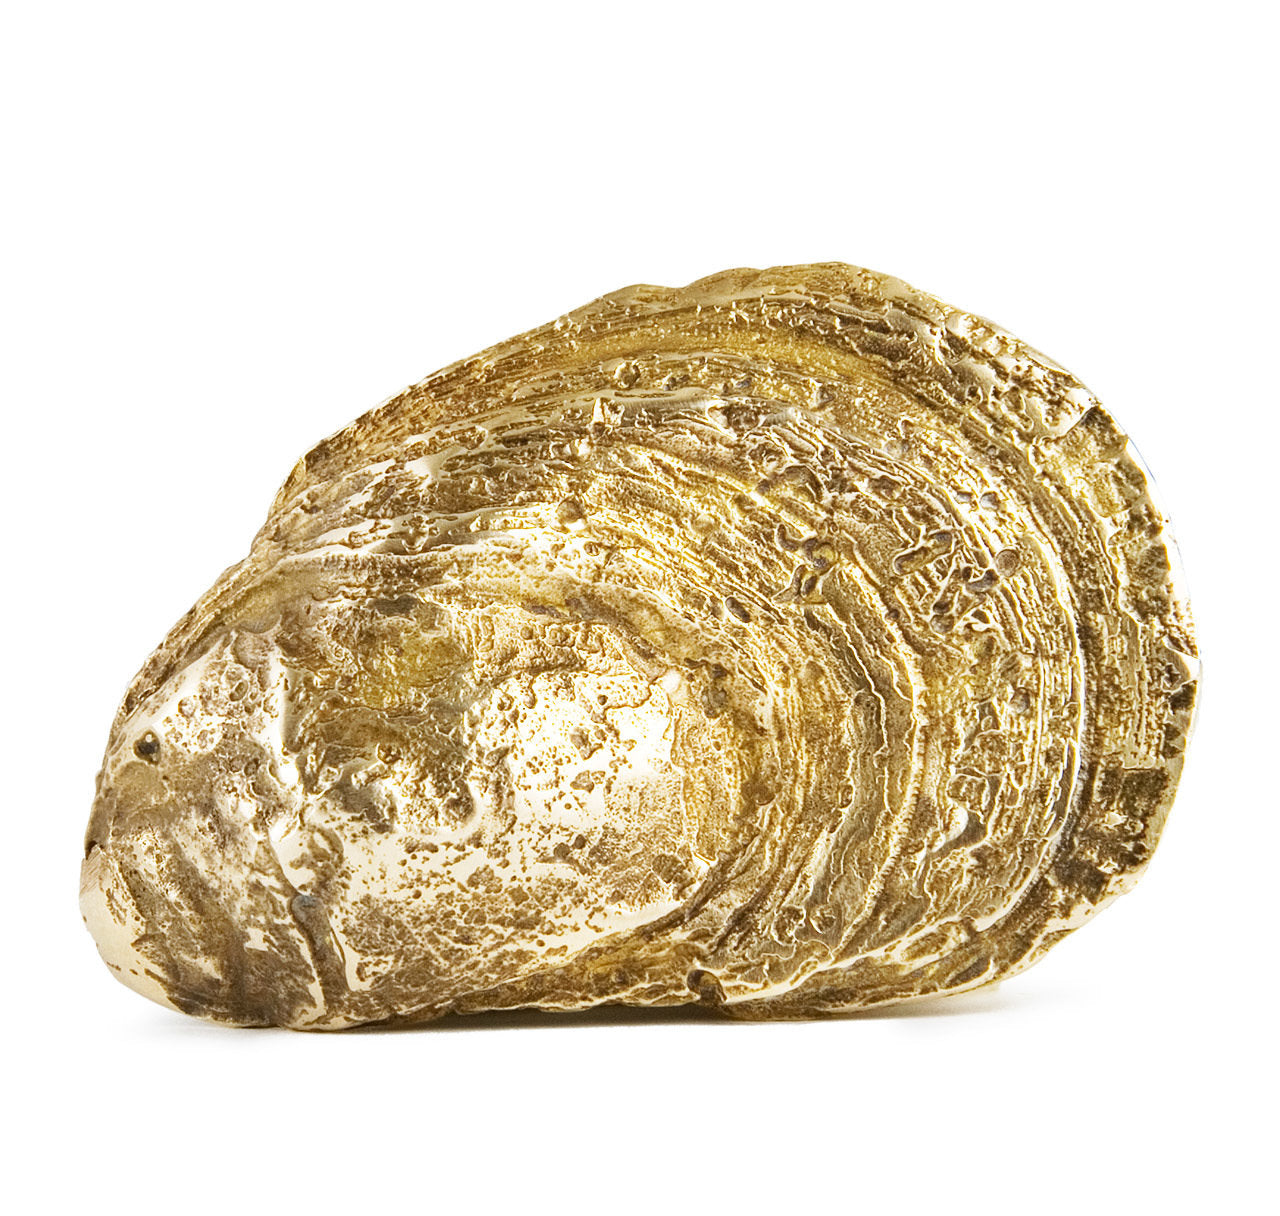 Sir Jack's Oyster Shell Buckle with Brown Leather Belt